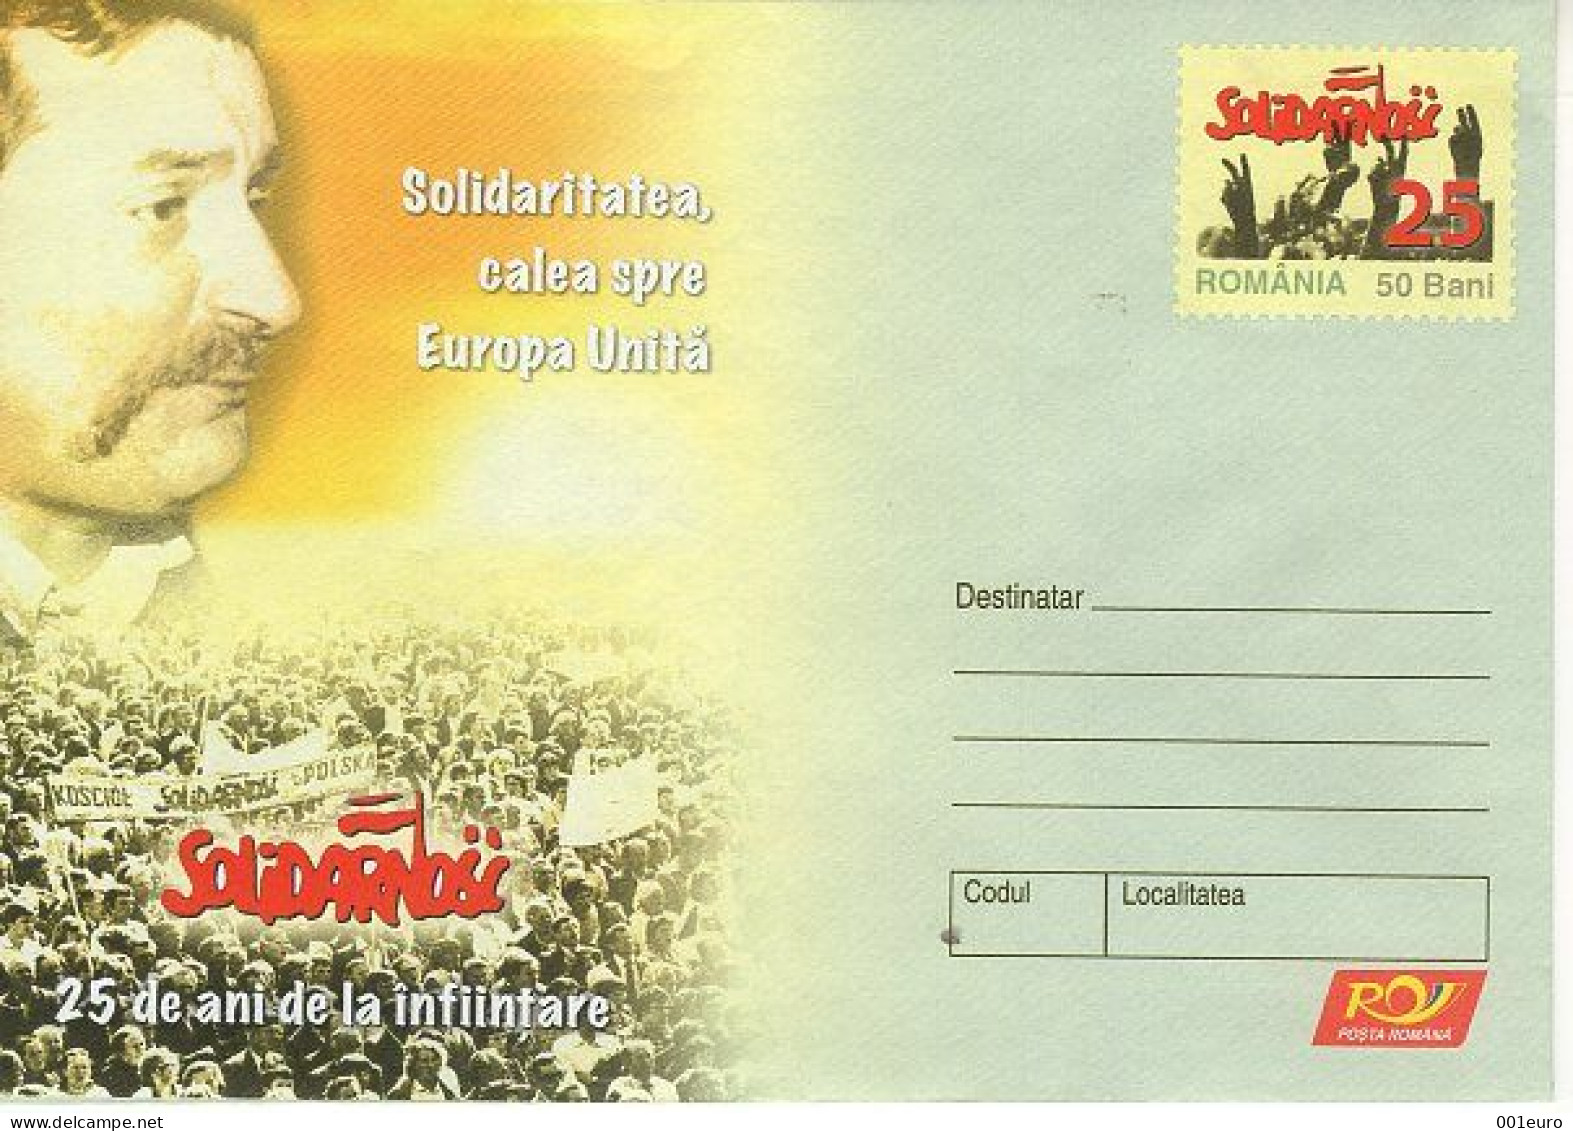 ROMANIA 097x2005: TRADE UNION "SOLIDARITY" FROM POLAND, Unused Prepaid Postal Stationery Cover - Registered Shipping! - Ganzsachen